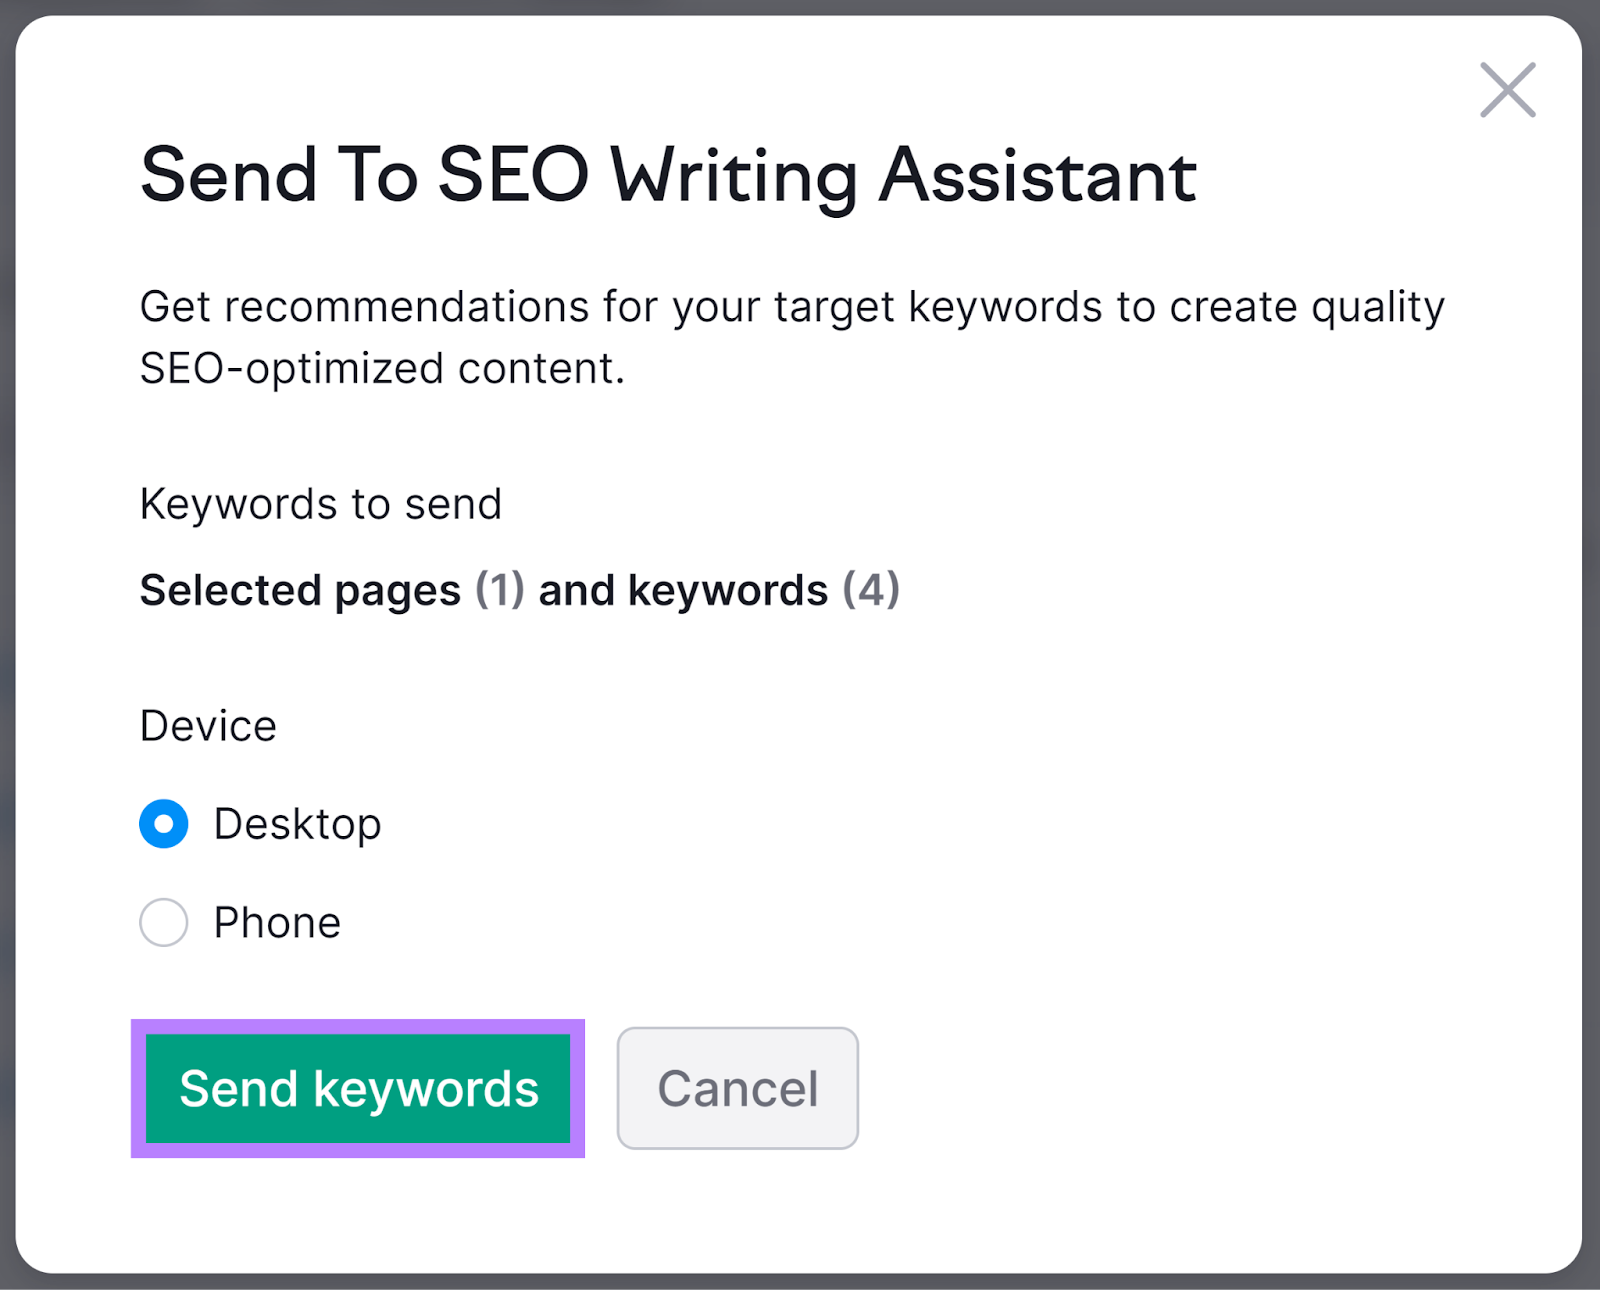 "Send to SEO Writing Assistant" pop-up window